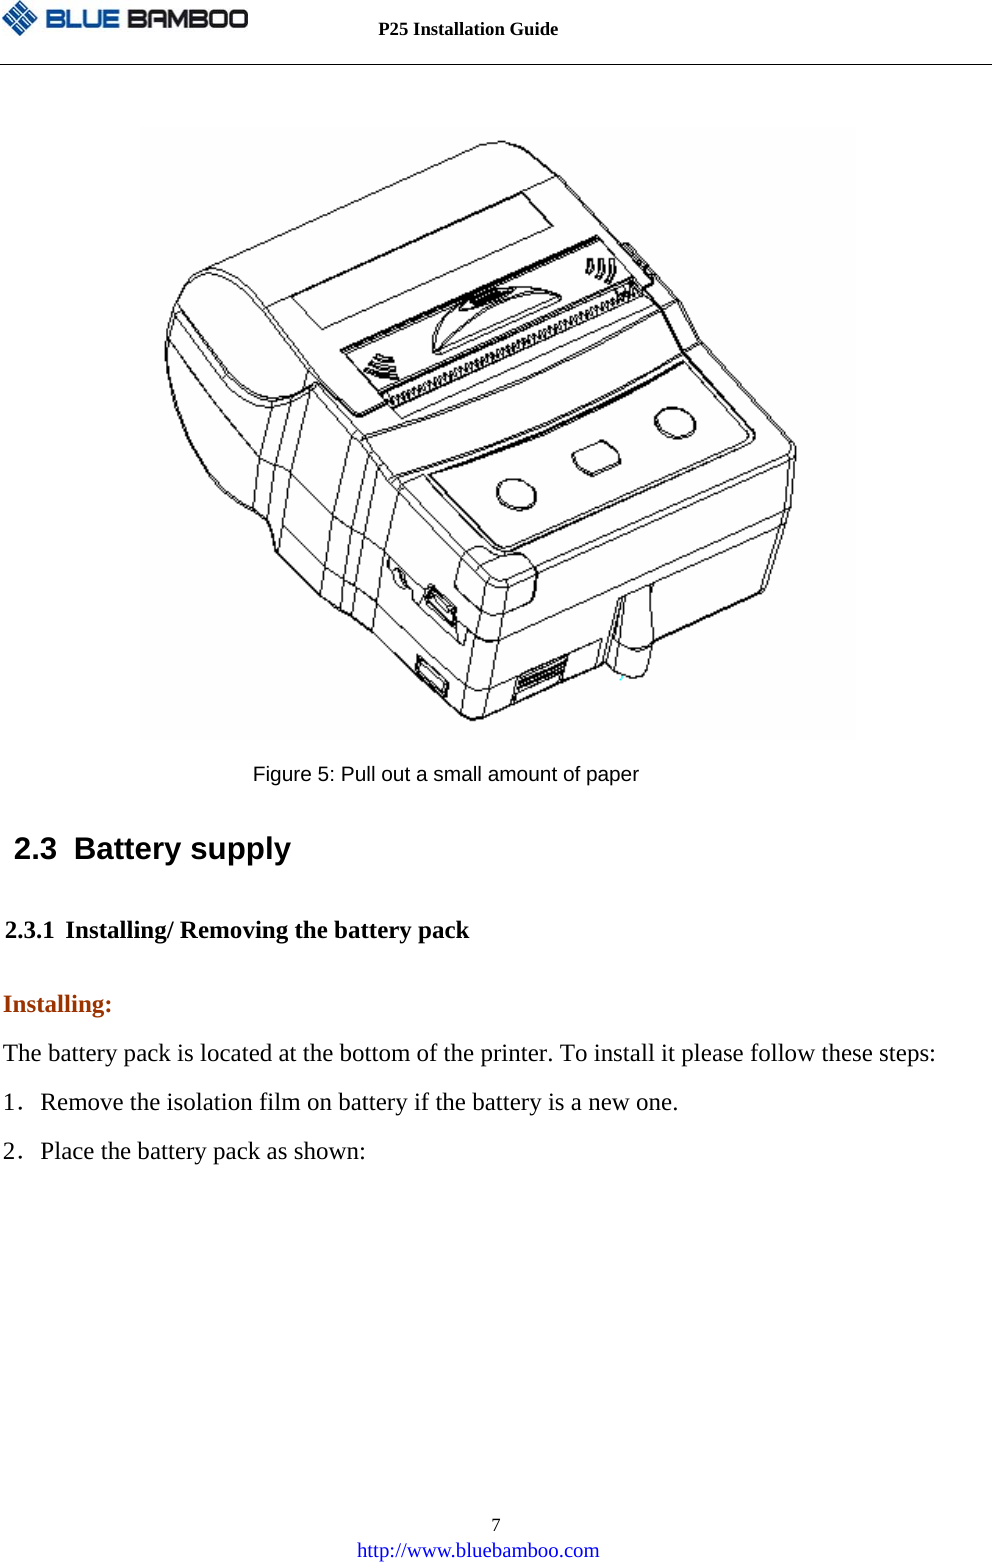          P25 Installation Guide   http://www.bluebamboo.com 7                     Figure 5: Pull out a small amount of paper 2.3 Battery supply 2.3.1 Installing/ Removing the battery pack Installing: The battery pack is located at the bottom of the printer. To install it please follow these steps: 1．Remove the isolation film on battery if the battery is a new one. 2．Place the battery pack as shown: 